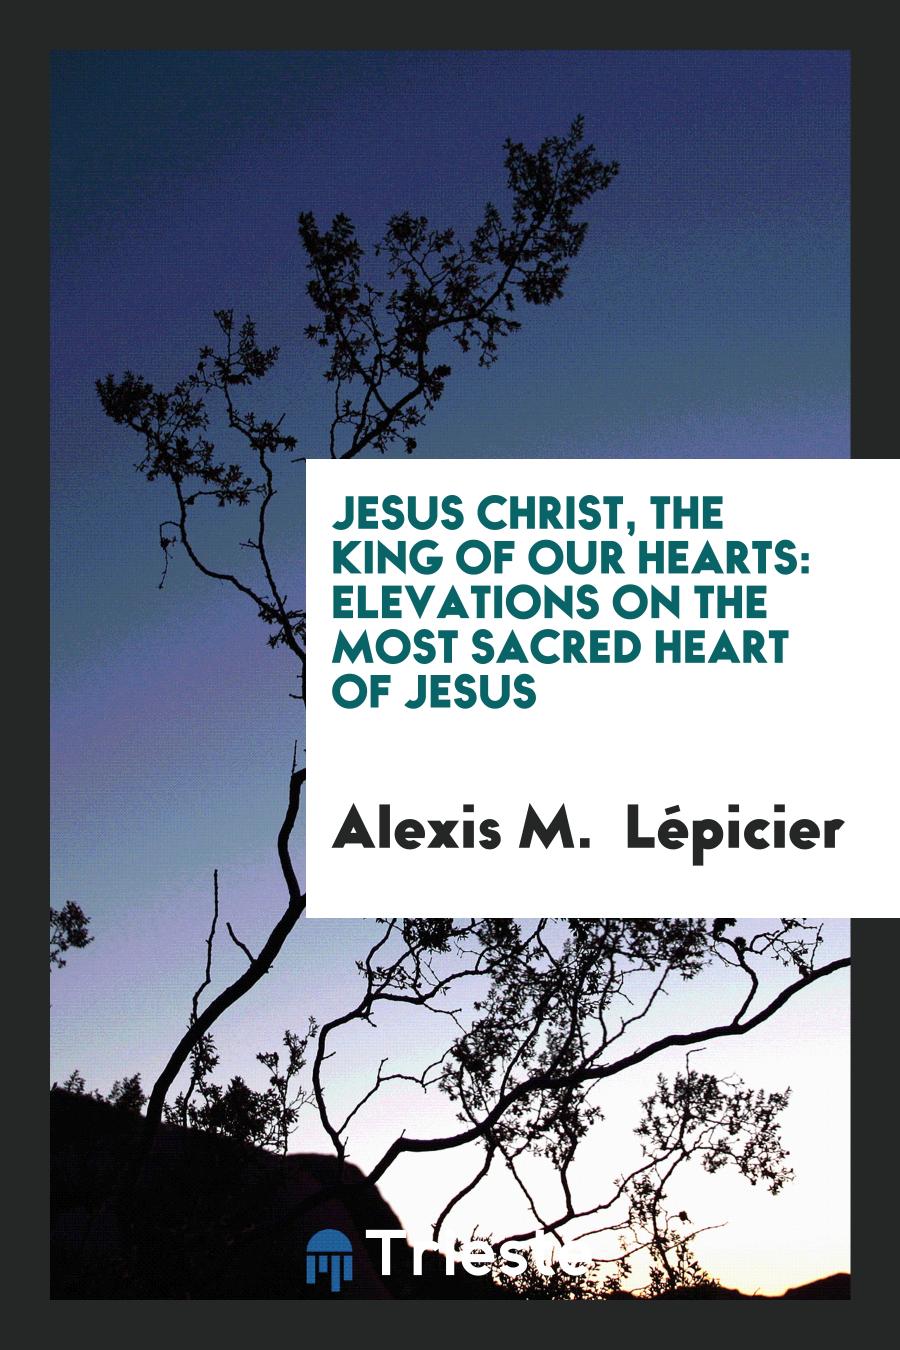 Jesus Christ, the King of Our Hearts: Elevations on the Most Sacred Heart of Jesus